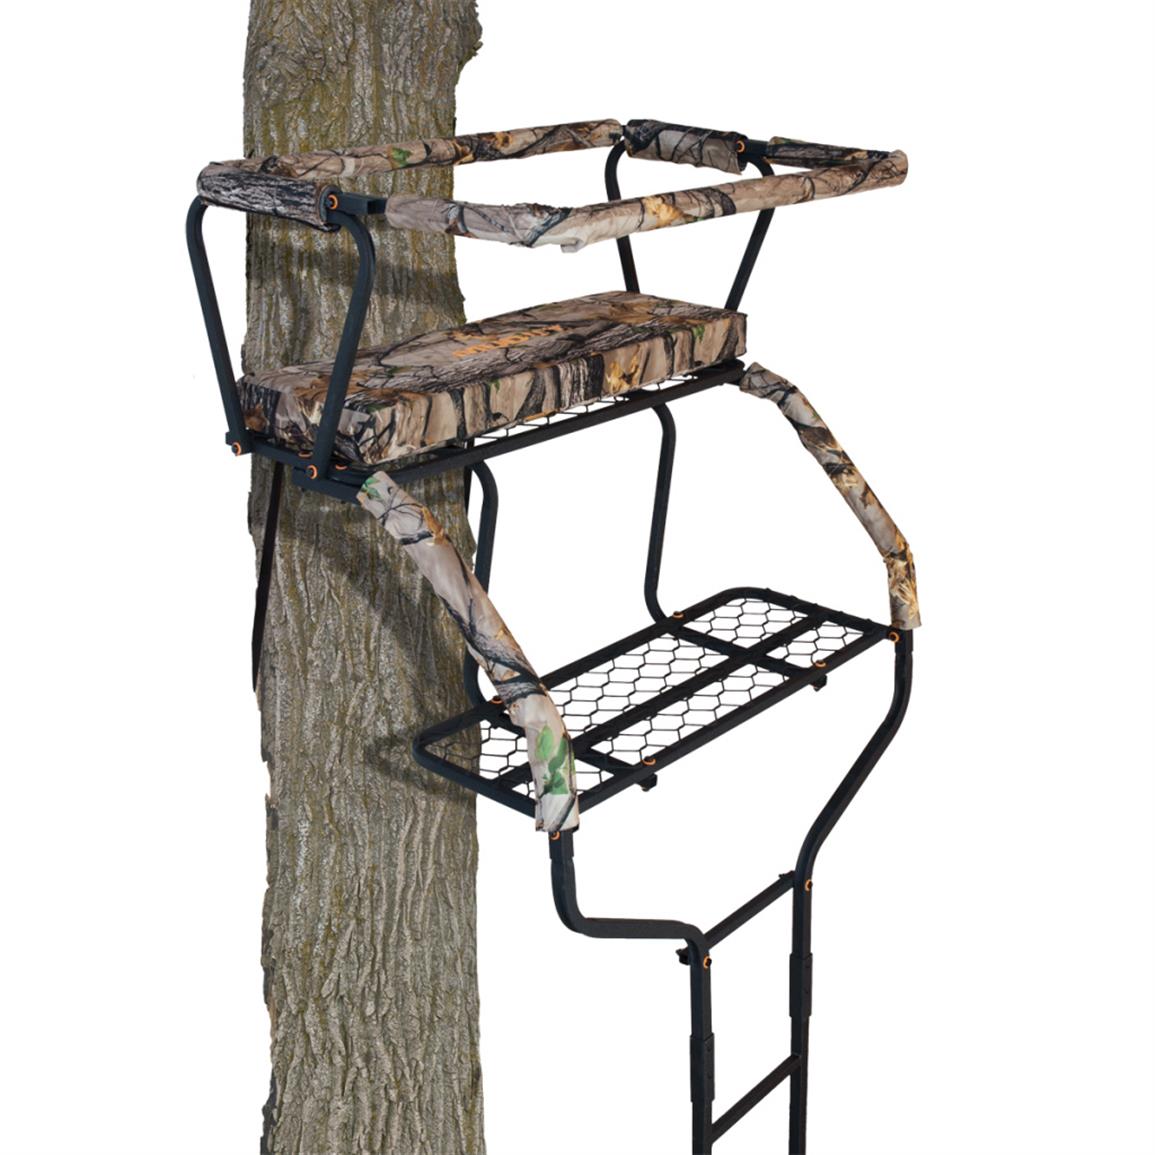 Muddy Commander Ladder Tree Stand, 2 Man, 18' 654196, Ladder Tree Stands at Sportsman's Guide